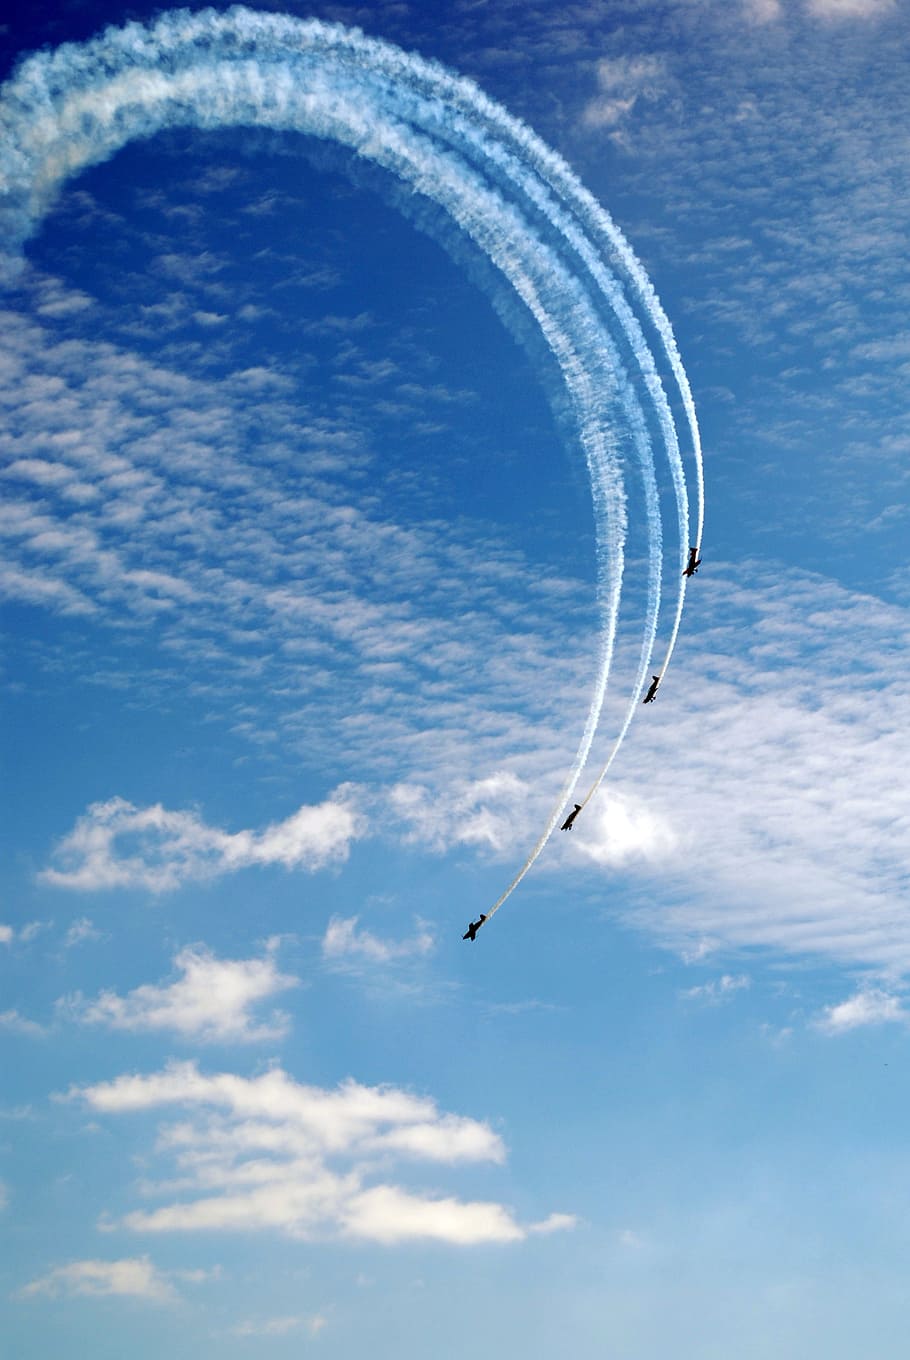 bournemouth, england, flugshow, sky, blue, aircraft, cloud - sky, flying, airplane, air vehicle